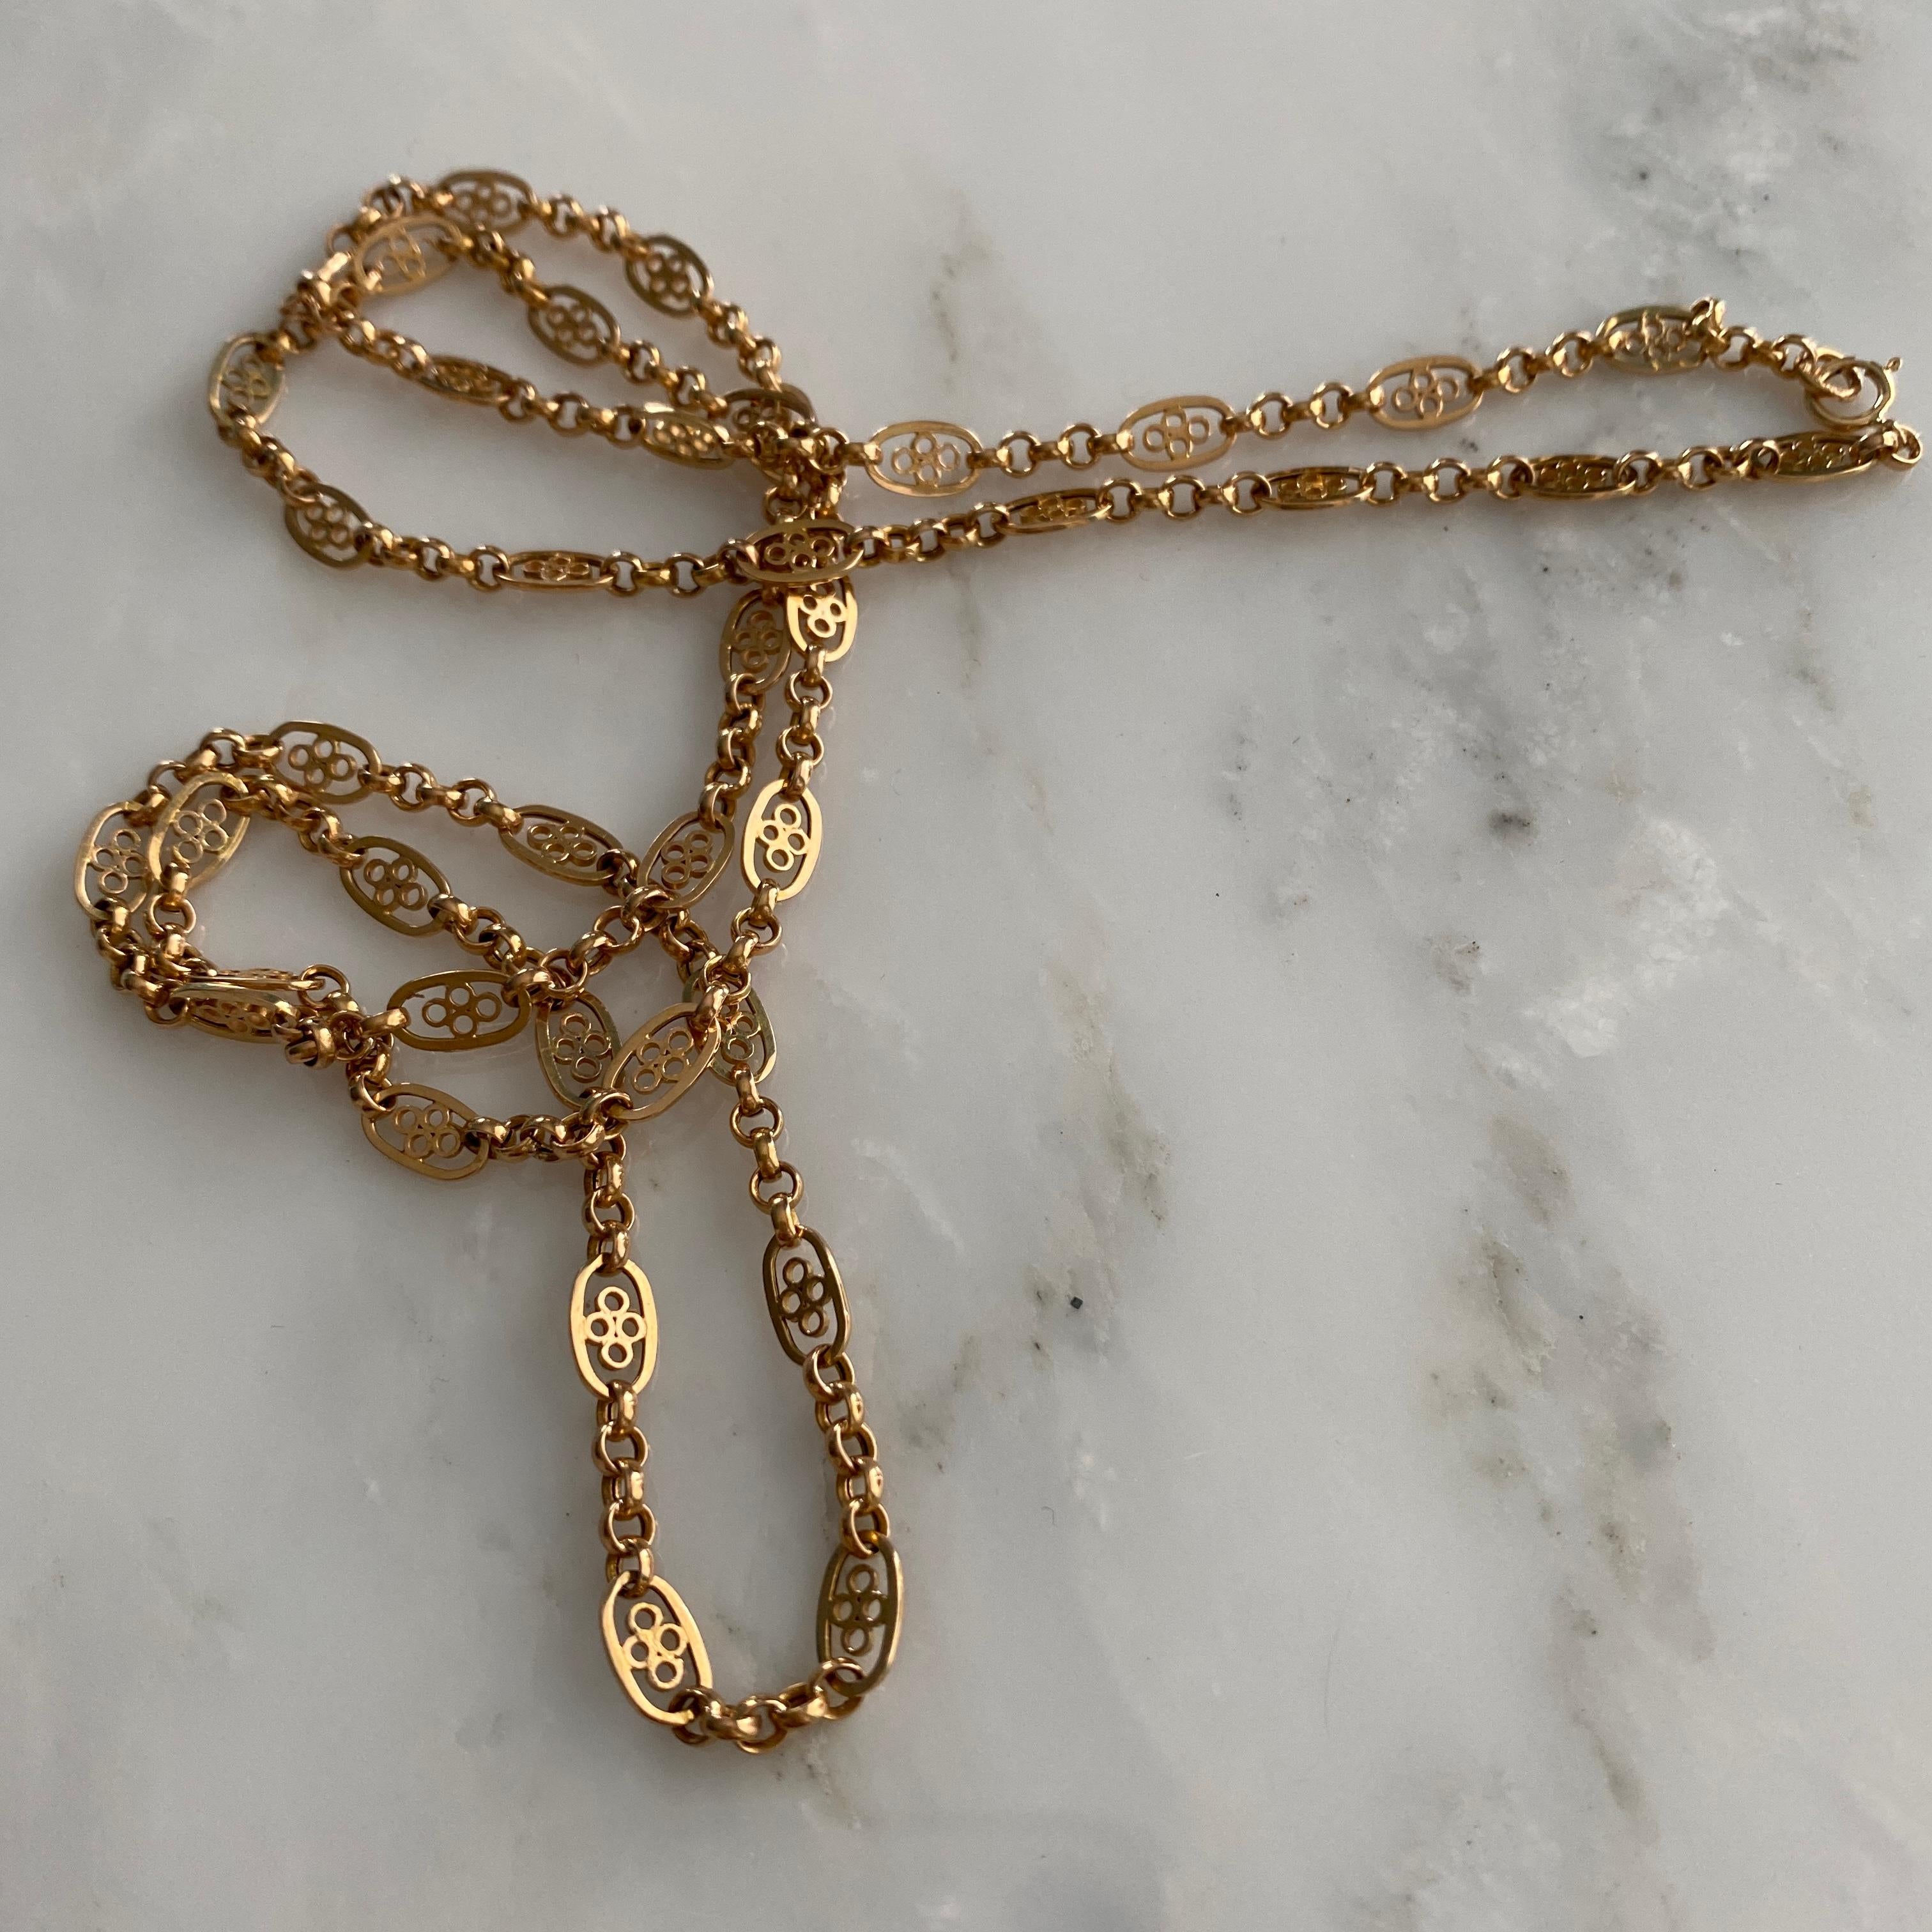 Victorian French Filigree 18K Gold Necklace Chain 9